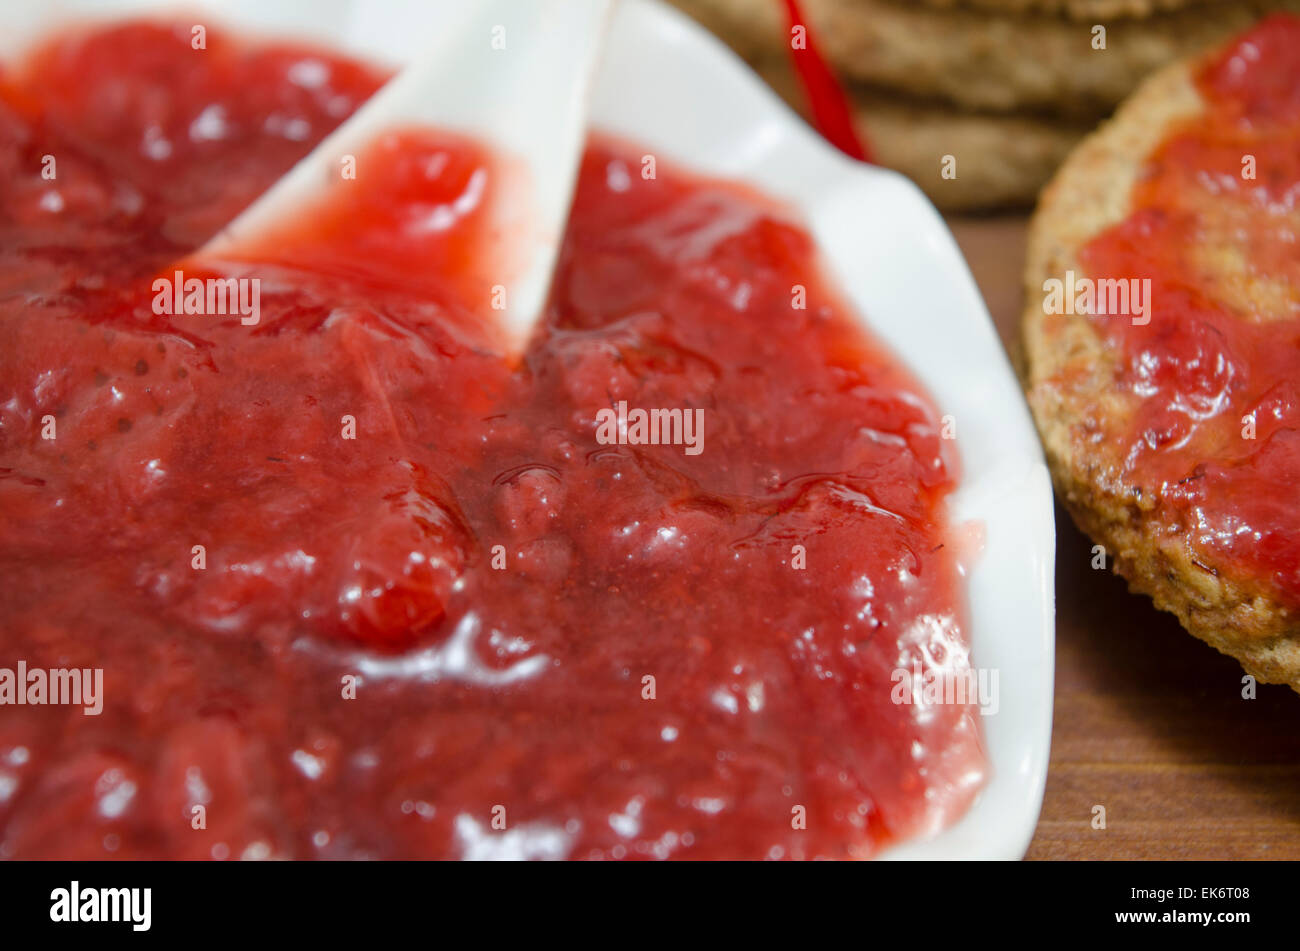 Several chocolate cookies covered with strawberry jelly on a wooden table Stock Photo